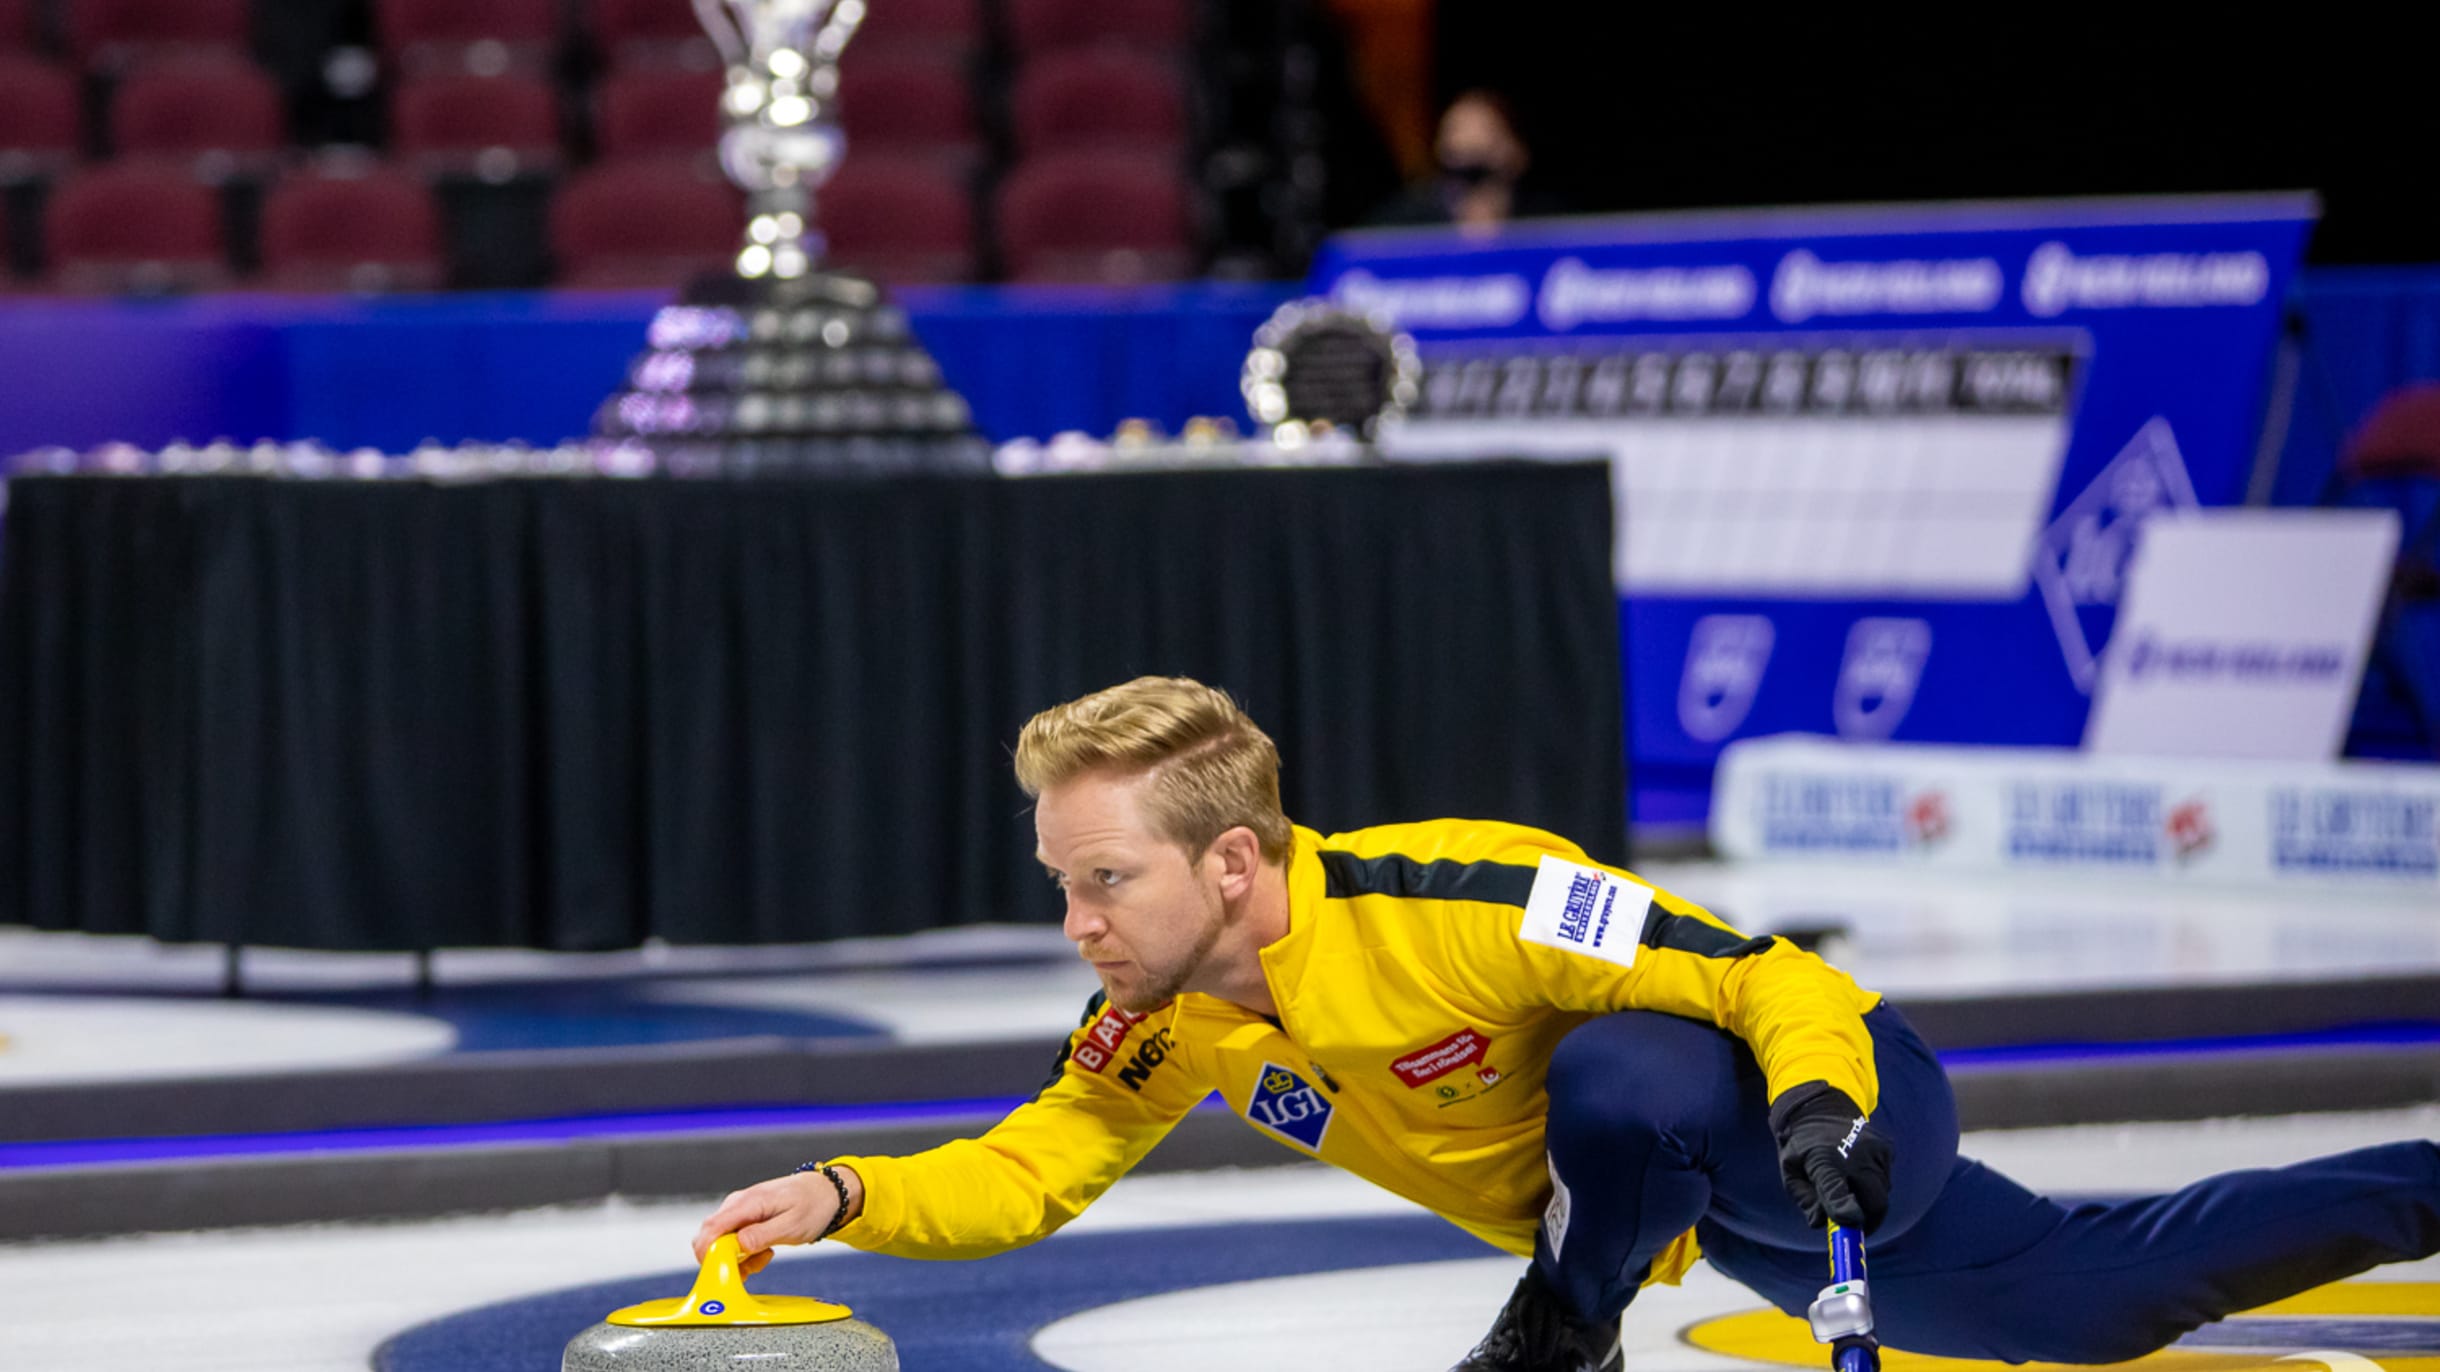 2023 World Mens Curling Championship Full schedule, preview, and how to watch live action